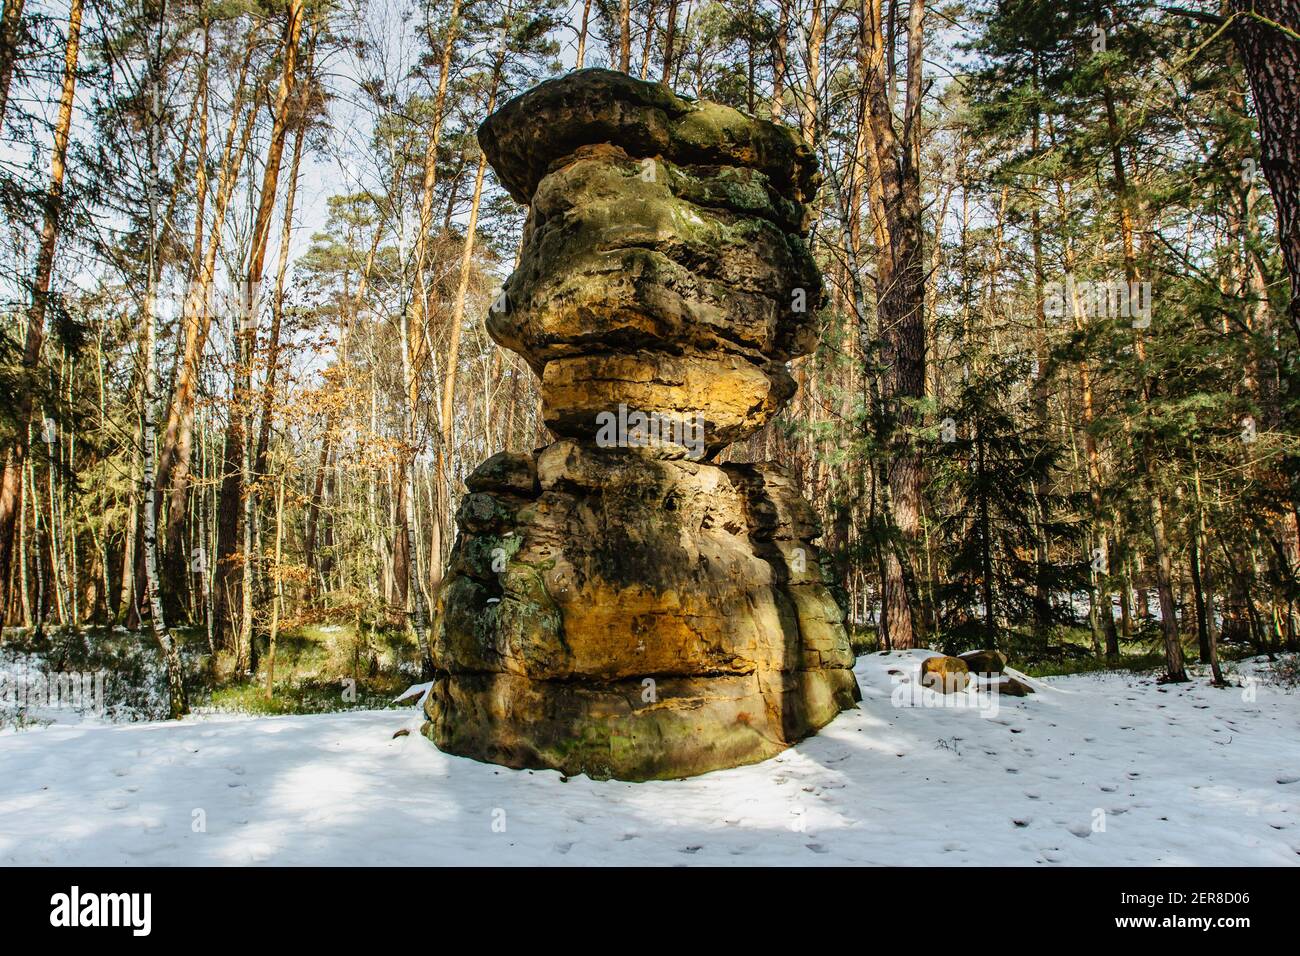 Formation called Seven breads,CZ Sedm chlebu, in sandstone rock. Natural erosion in pine forest near Zelizy village, Czech Republic. Sunny winter day Stock Photo